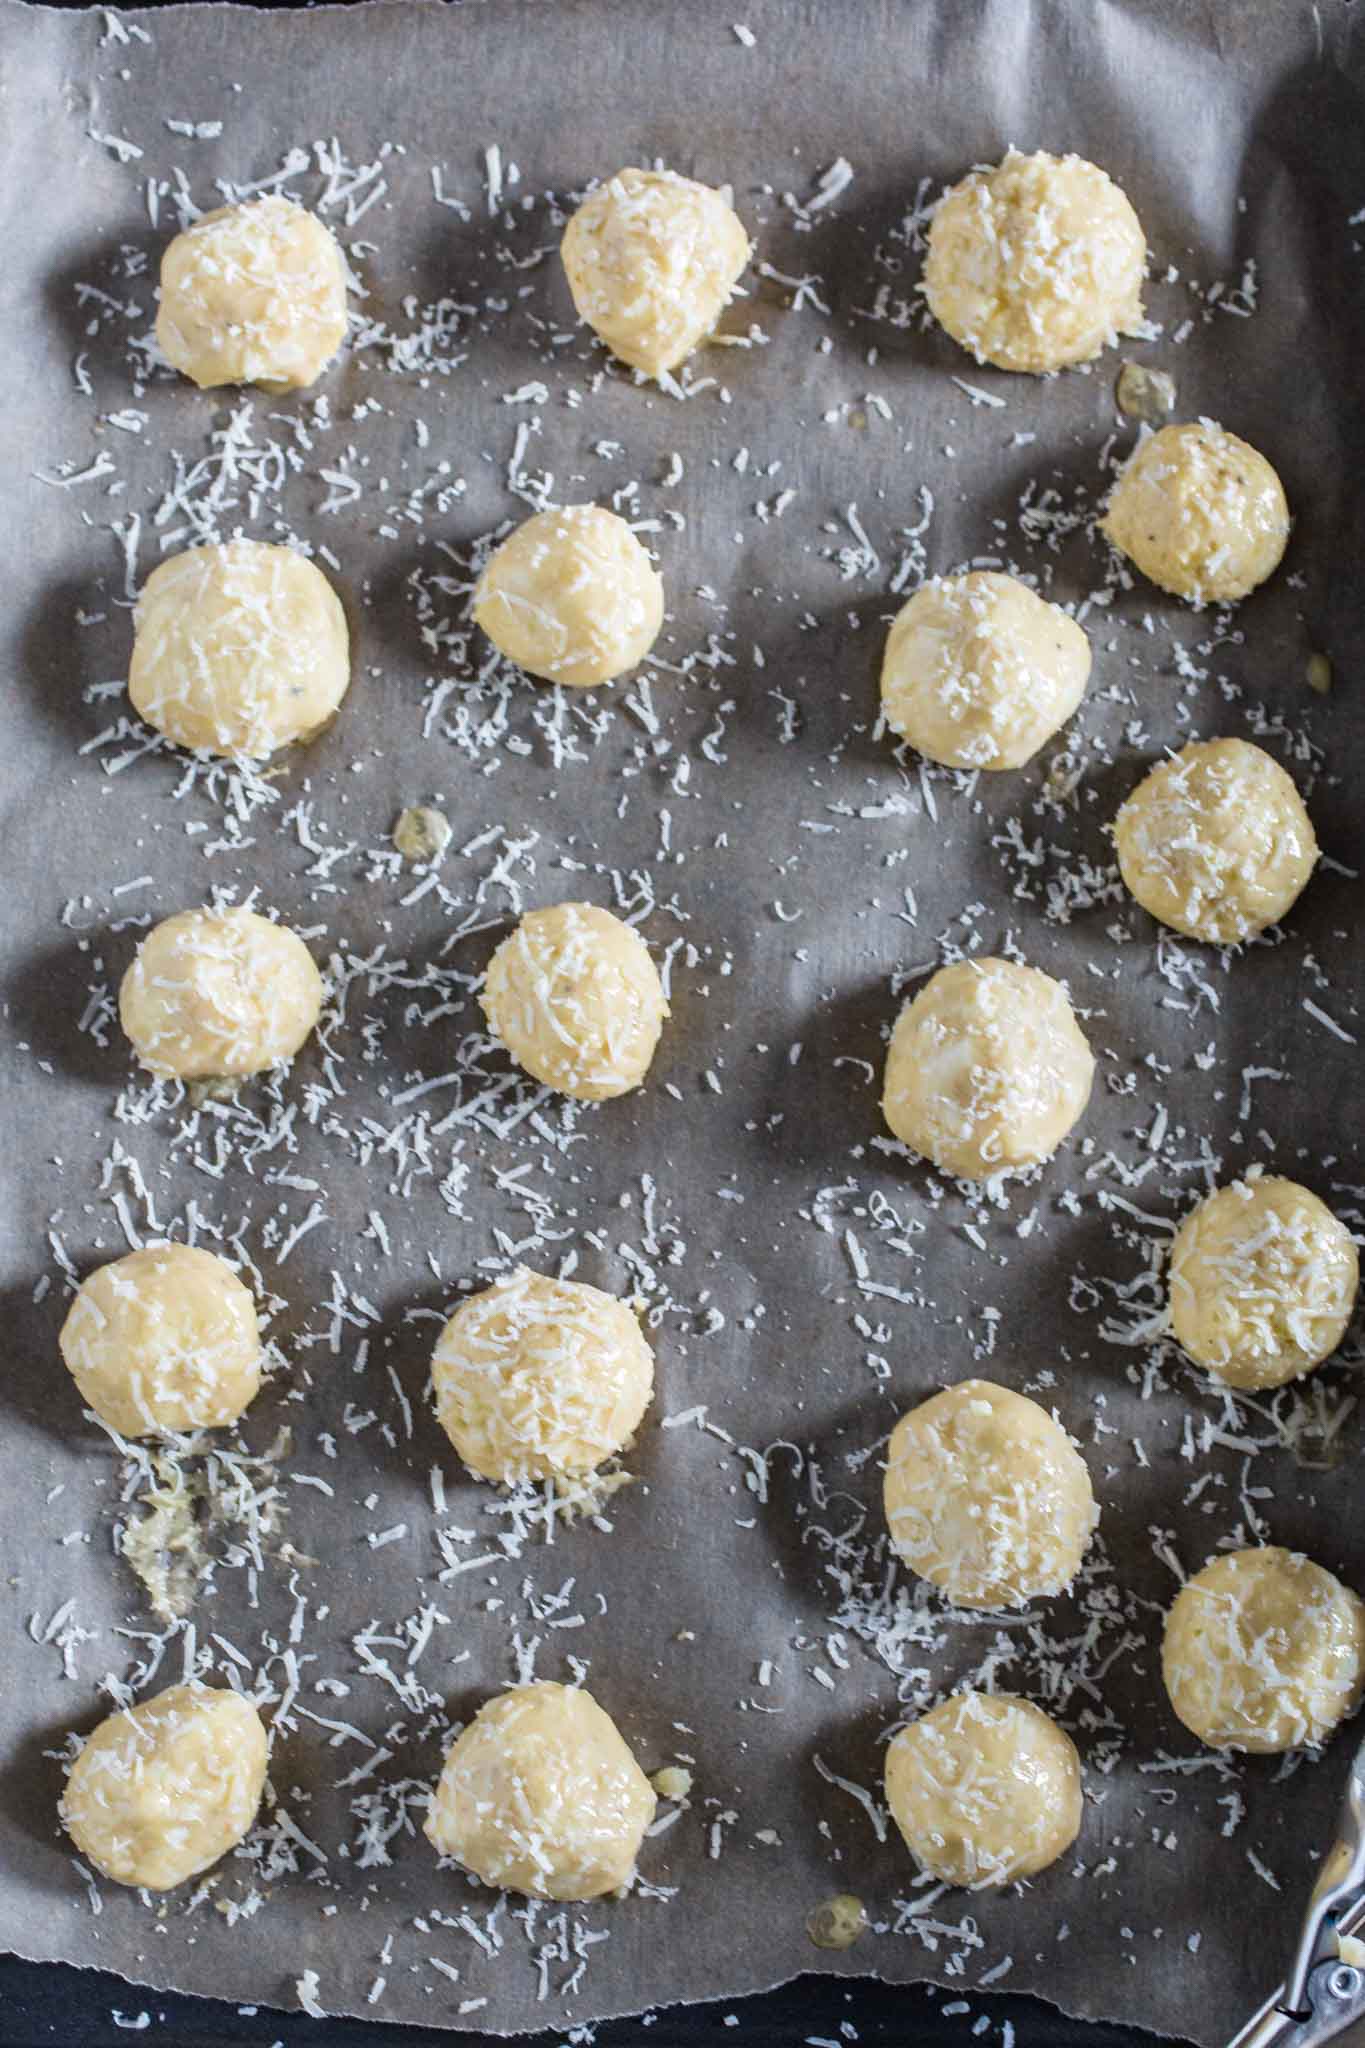 Gougeres (French Cheese Puffs) | www.oliviascuisine.com | A delicate savory hors d'oeuvre made with Gruyere cheese.